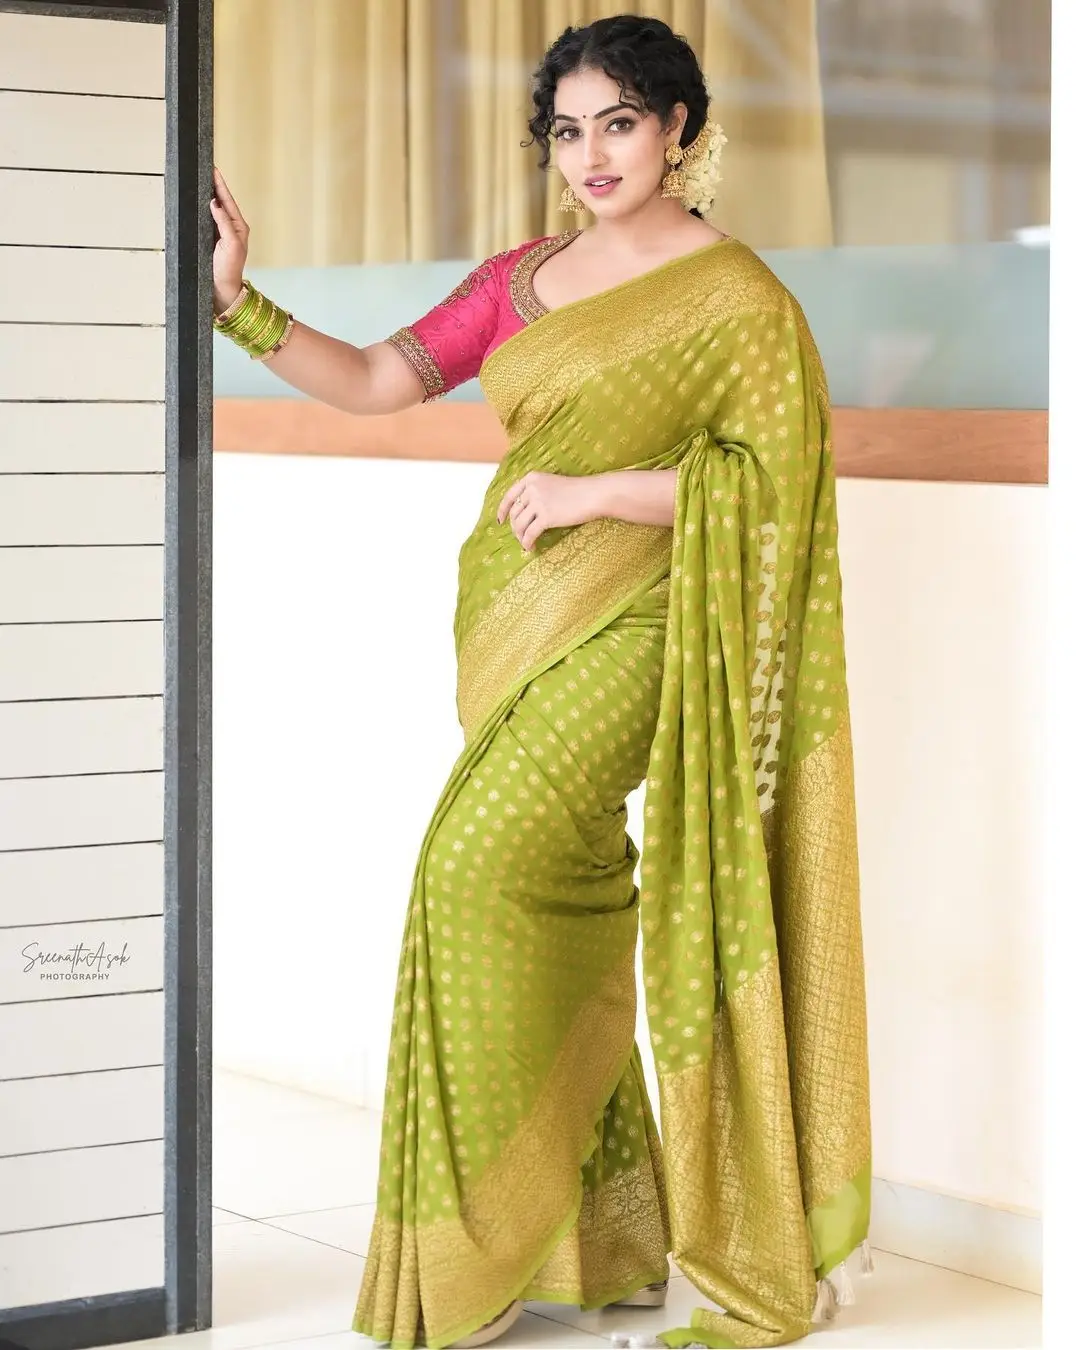 MALAVIKA MENON IN SOUTH INDIAN TRADITIONAL GREEN SAREE RED BLOUSE 16